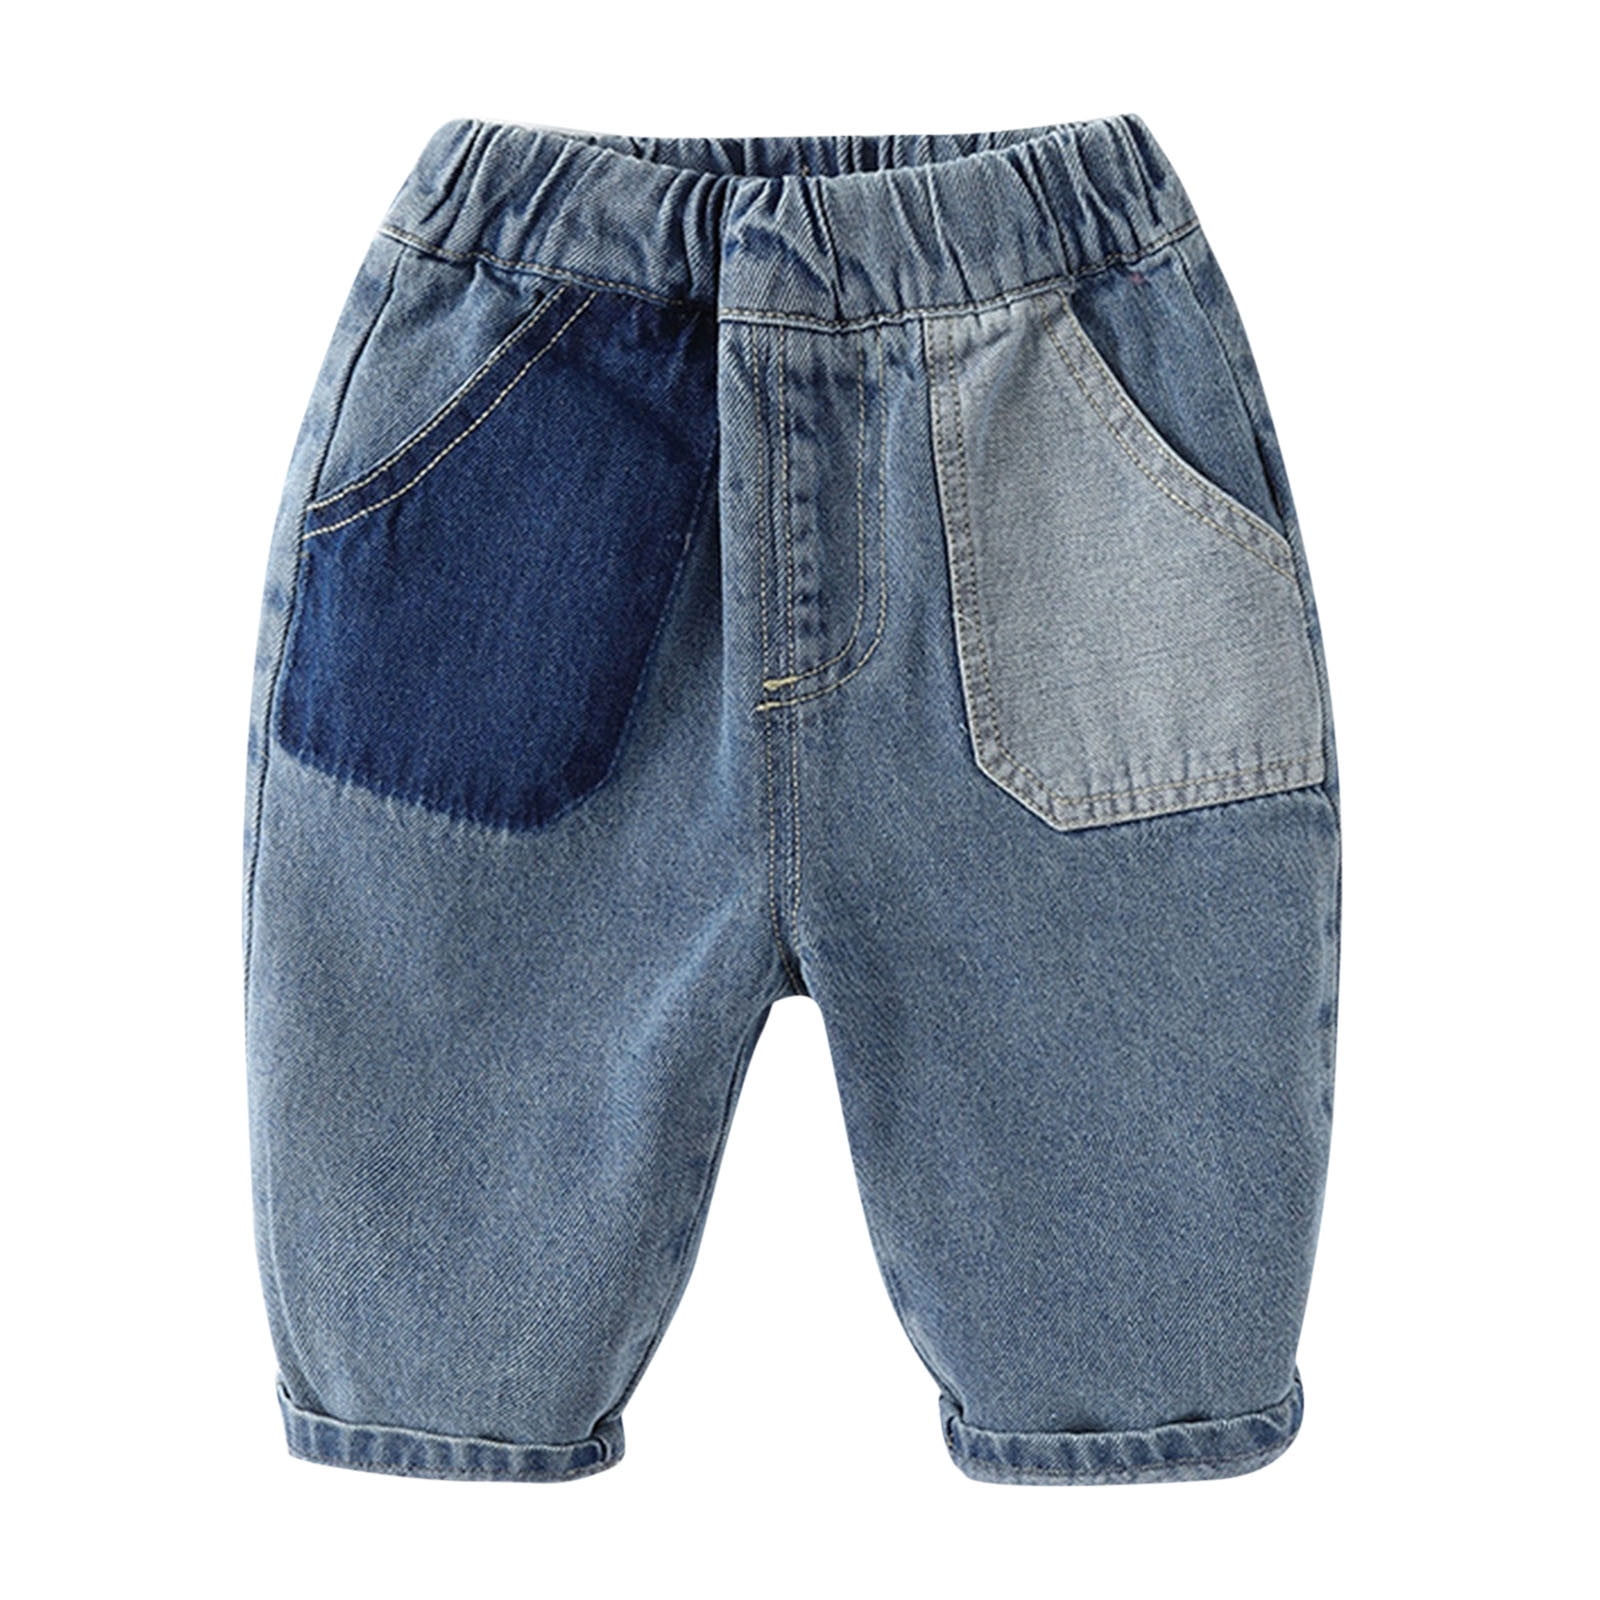 ZIZOCWA Baby Boy Pants 6-9 Months Summer Retro Boys Jeans Clothes Children  Kids Toddler Baby Patchwork Jeans Pants Trousers Outfits Clothes Blue 